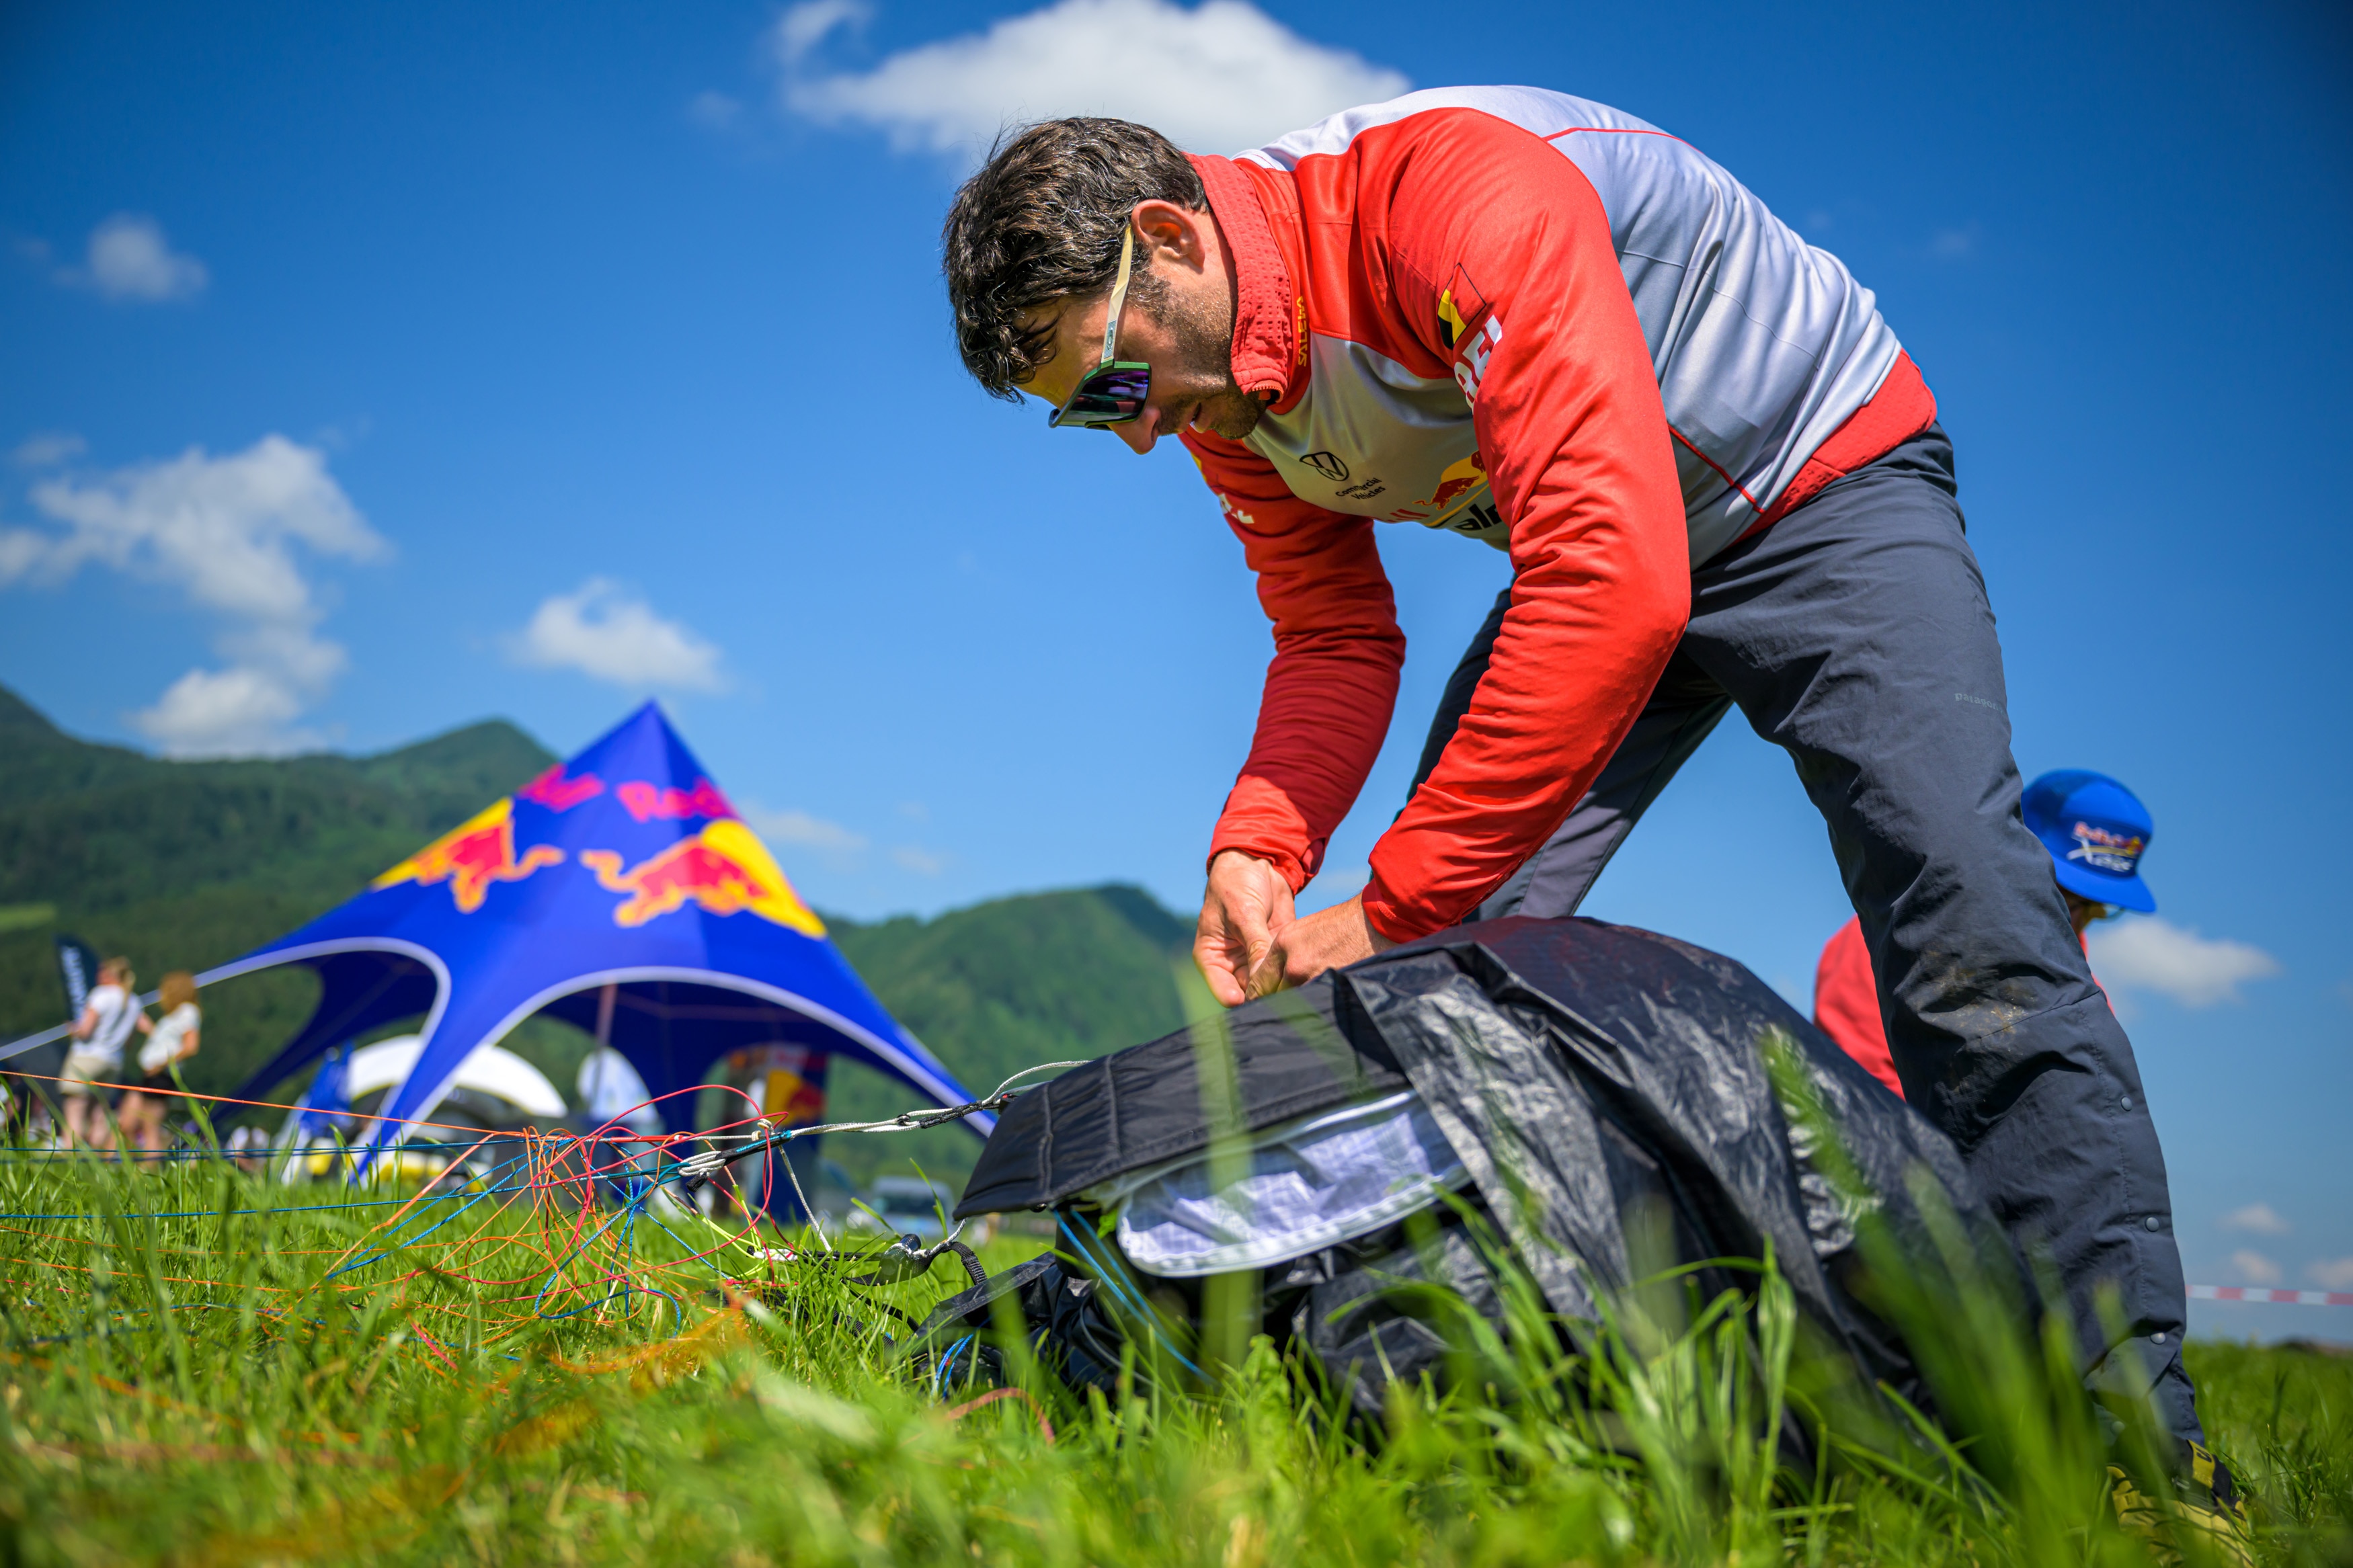 Thomas de Dordolot prepares during the Red Bull X-Alps in Chiemgau - Achental, Germany on June 12, 2023.